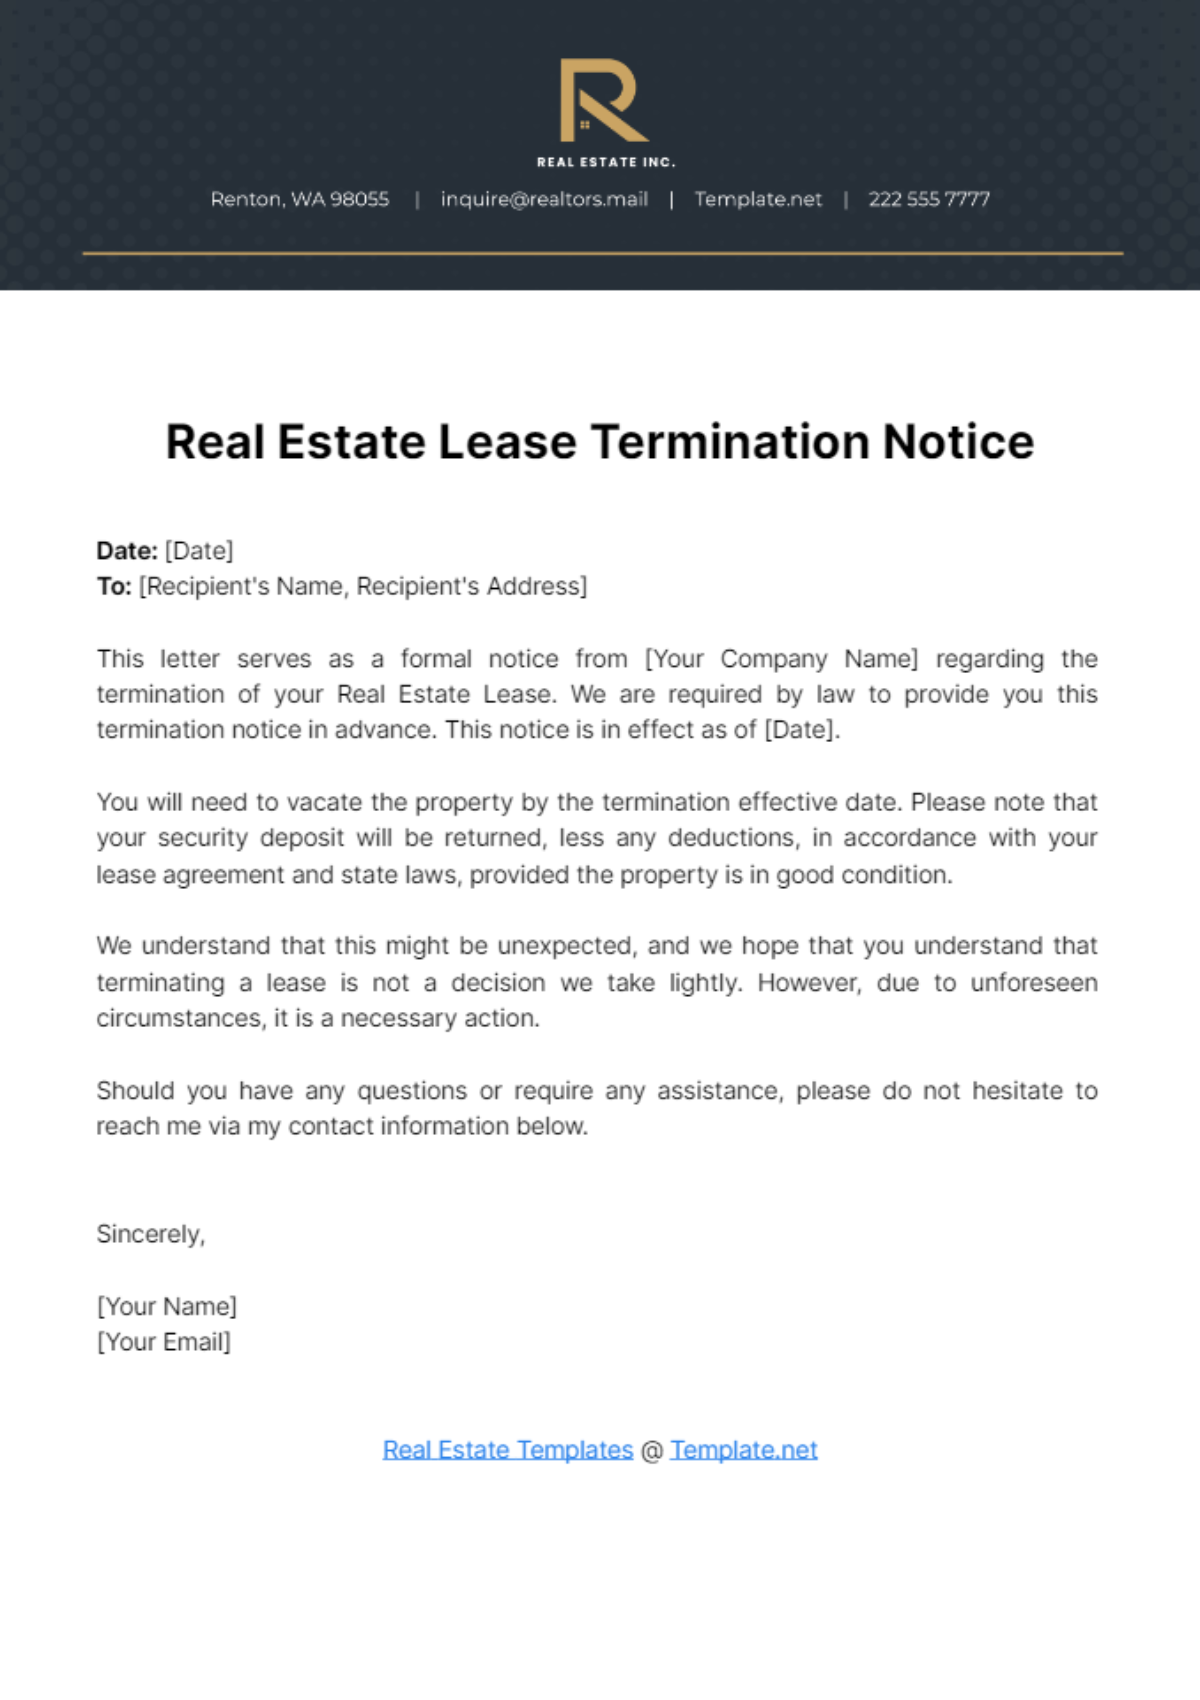 Real Estate Lease Termination Notice Template